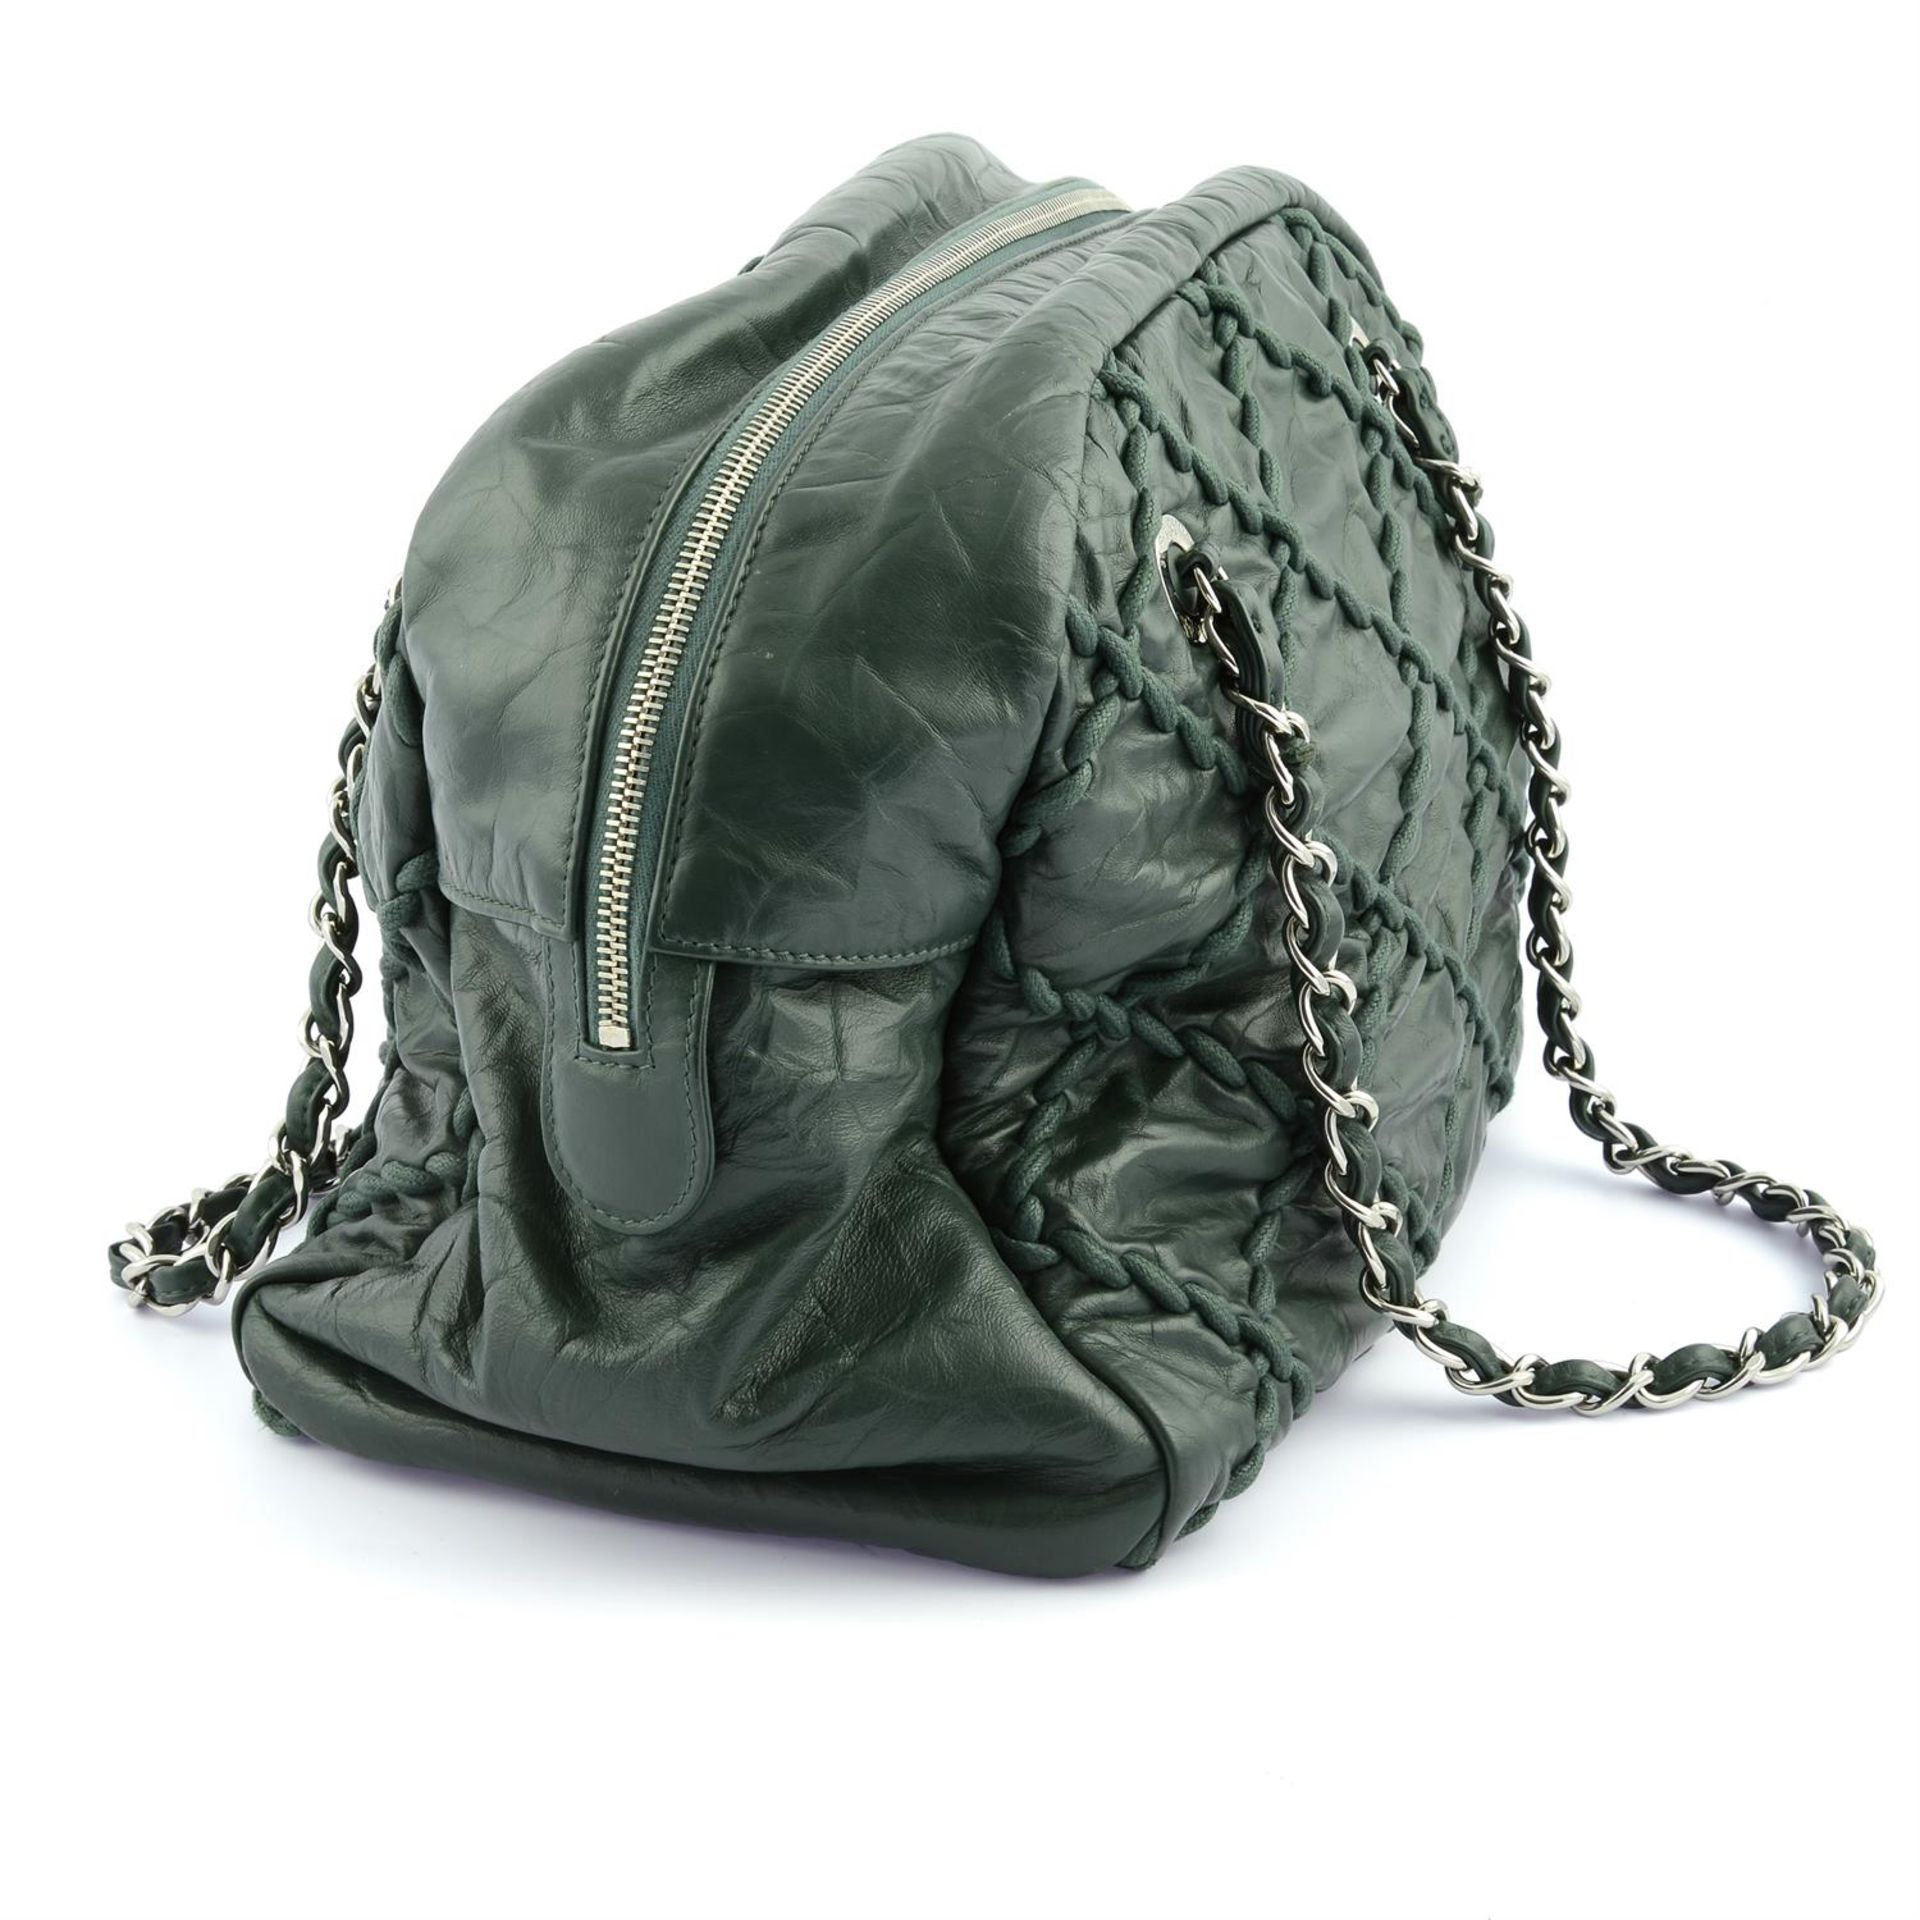 CHANEL - a green crinkled leather Ultra stitch bowling bag. - Image 3 of 4